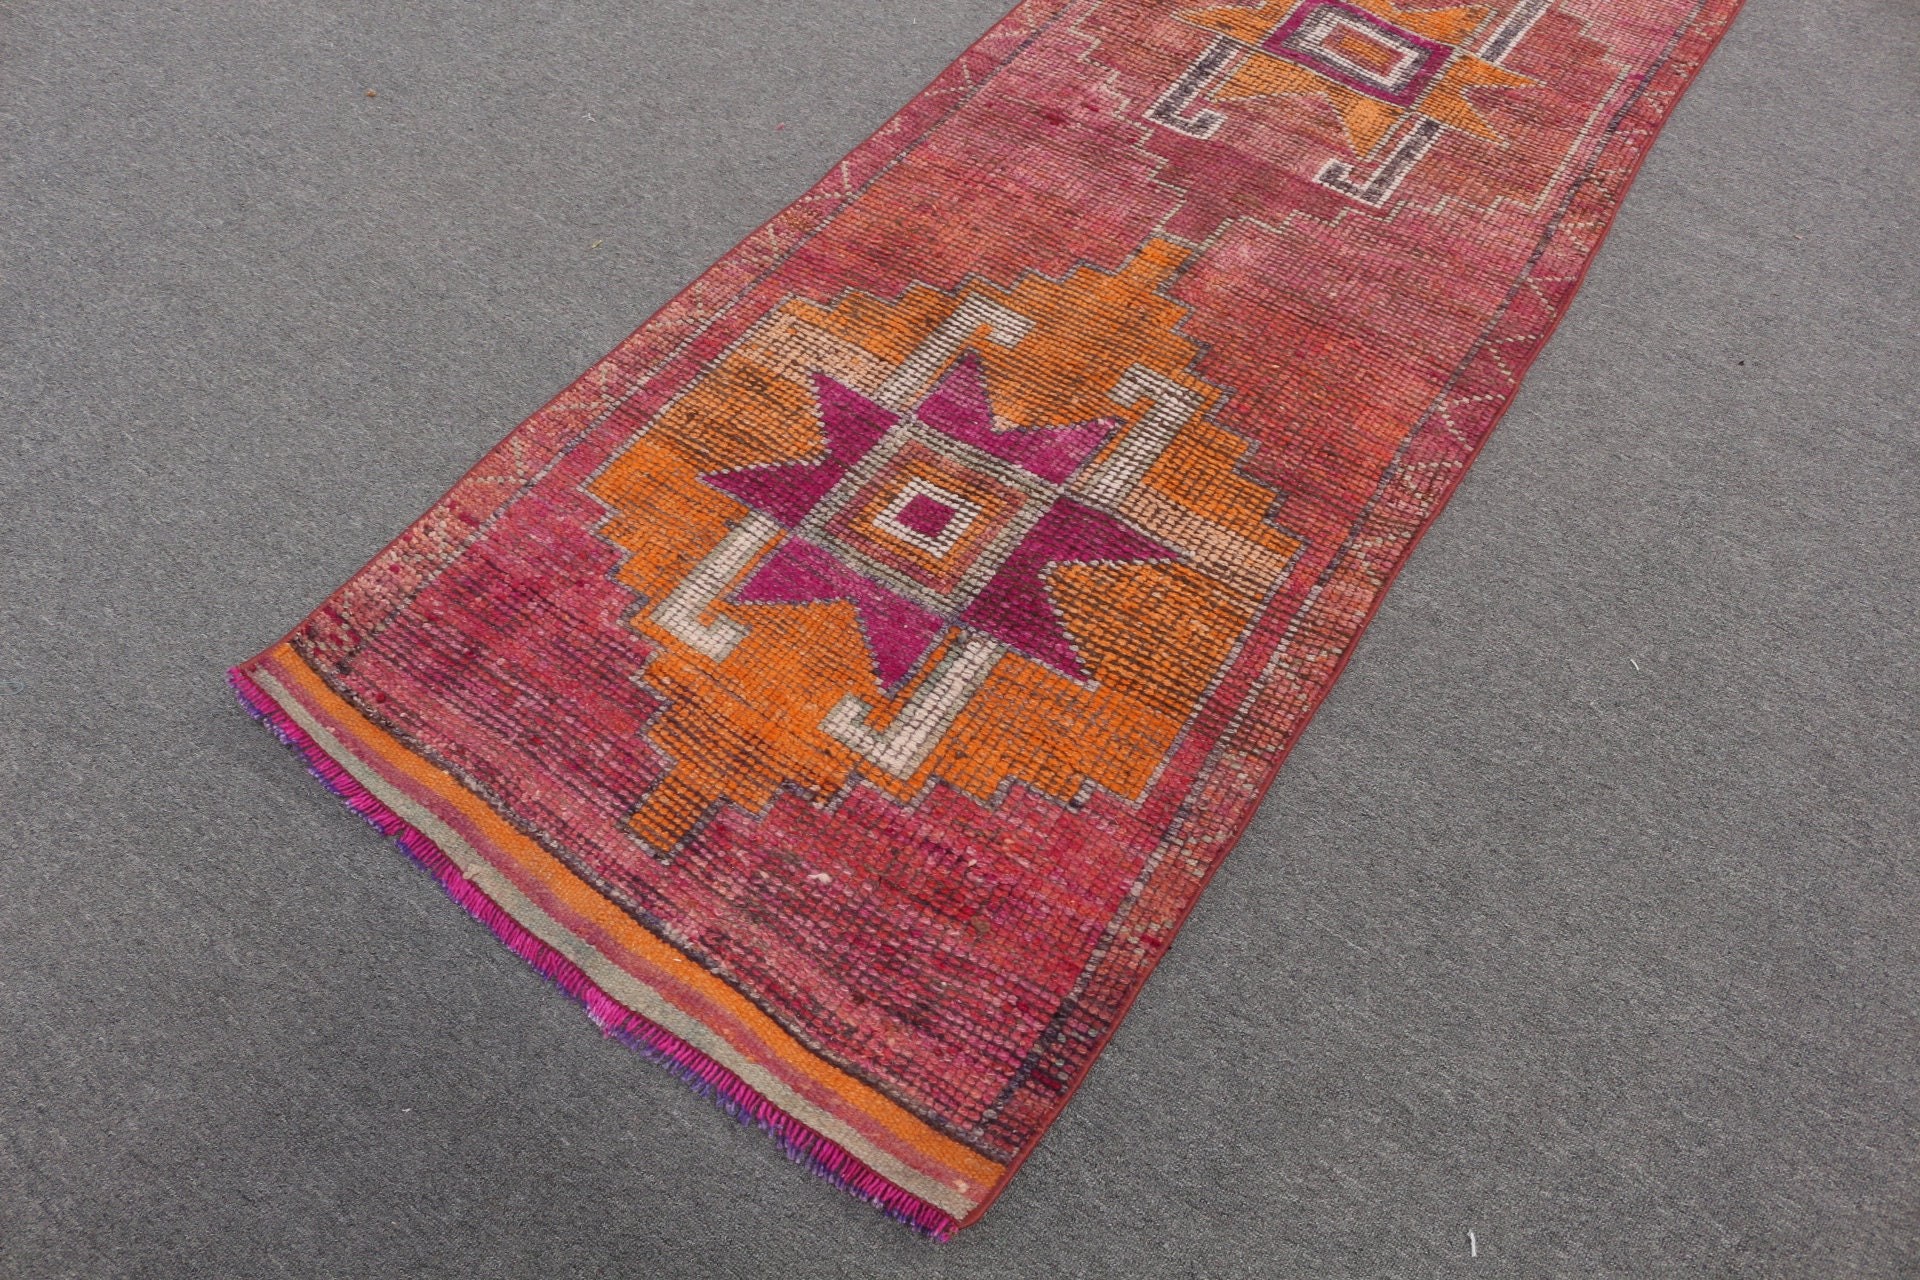 2.8x10.5 ft Runner Rug, Turkish Rugs, Stair Rugs, Vintage Rug, Cool Rugs, Antique Rug, Orange Anatolian Rug, Rugs for Kitchen, Kitchen Rug